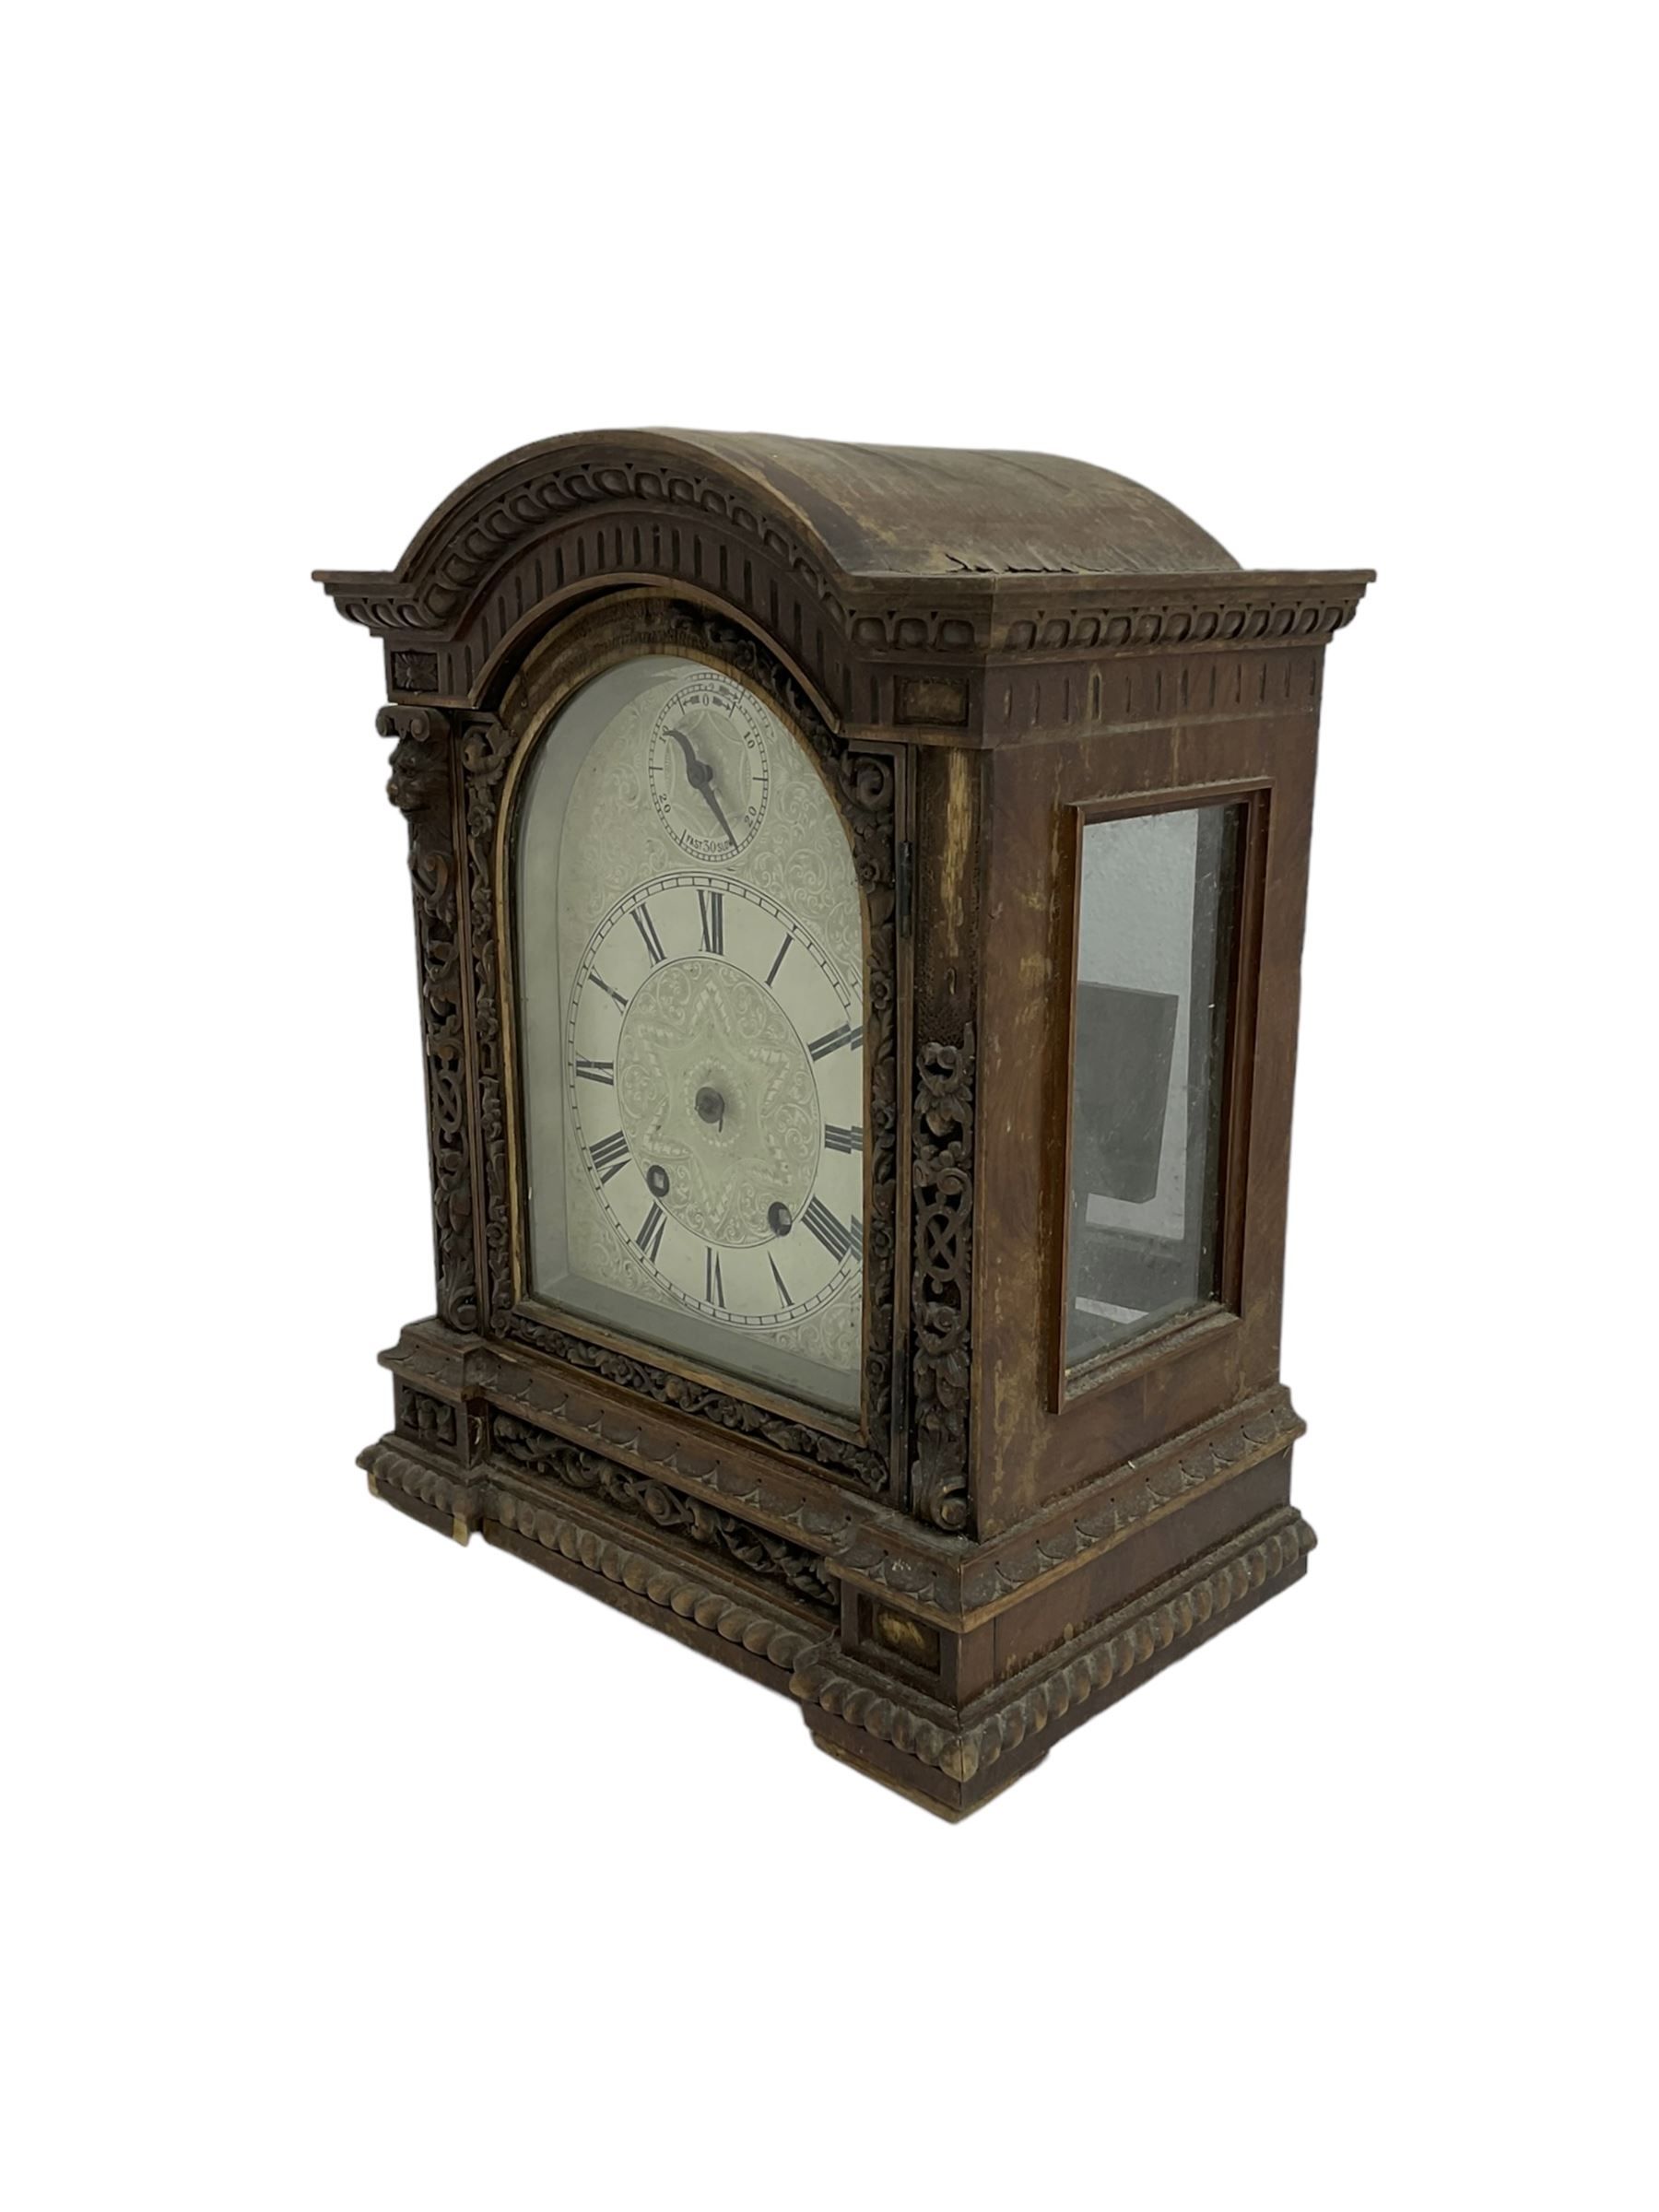 Edwardian German mantle clock striking the hours and half hours on two coiled gongs. - Image 2 of 3